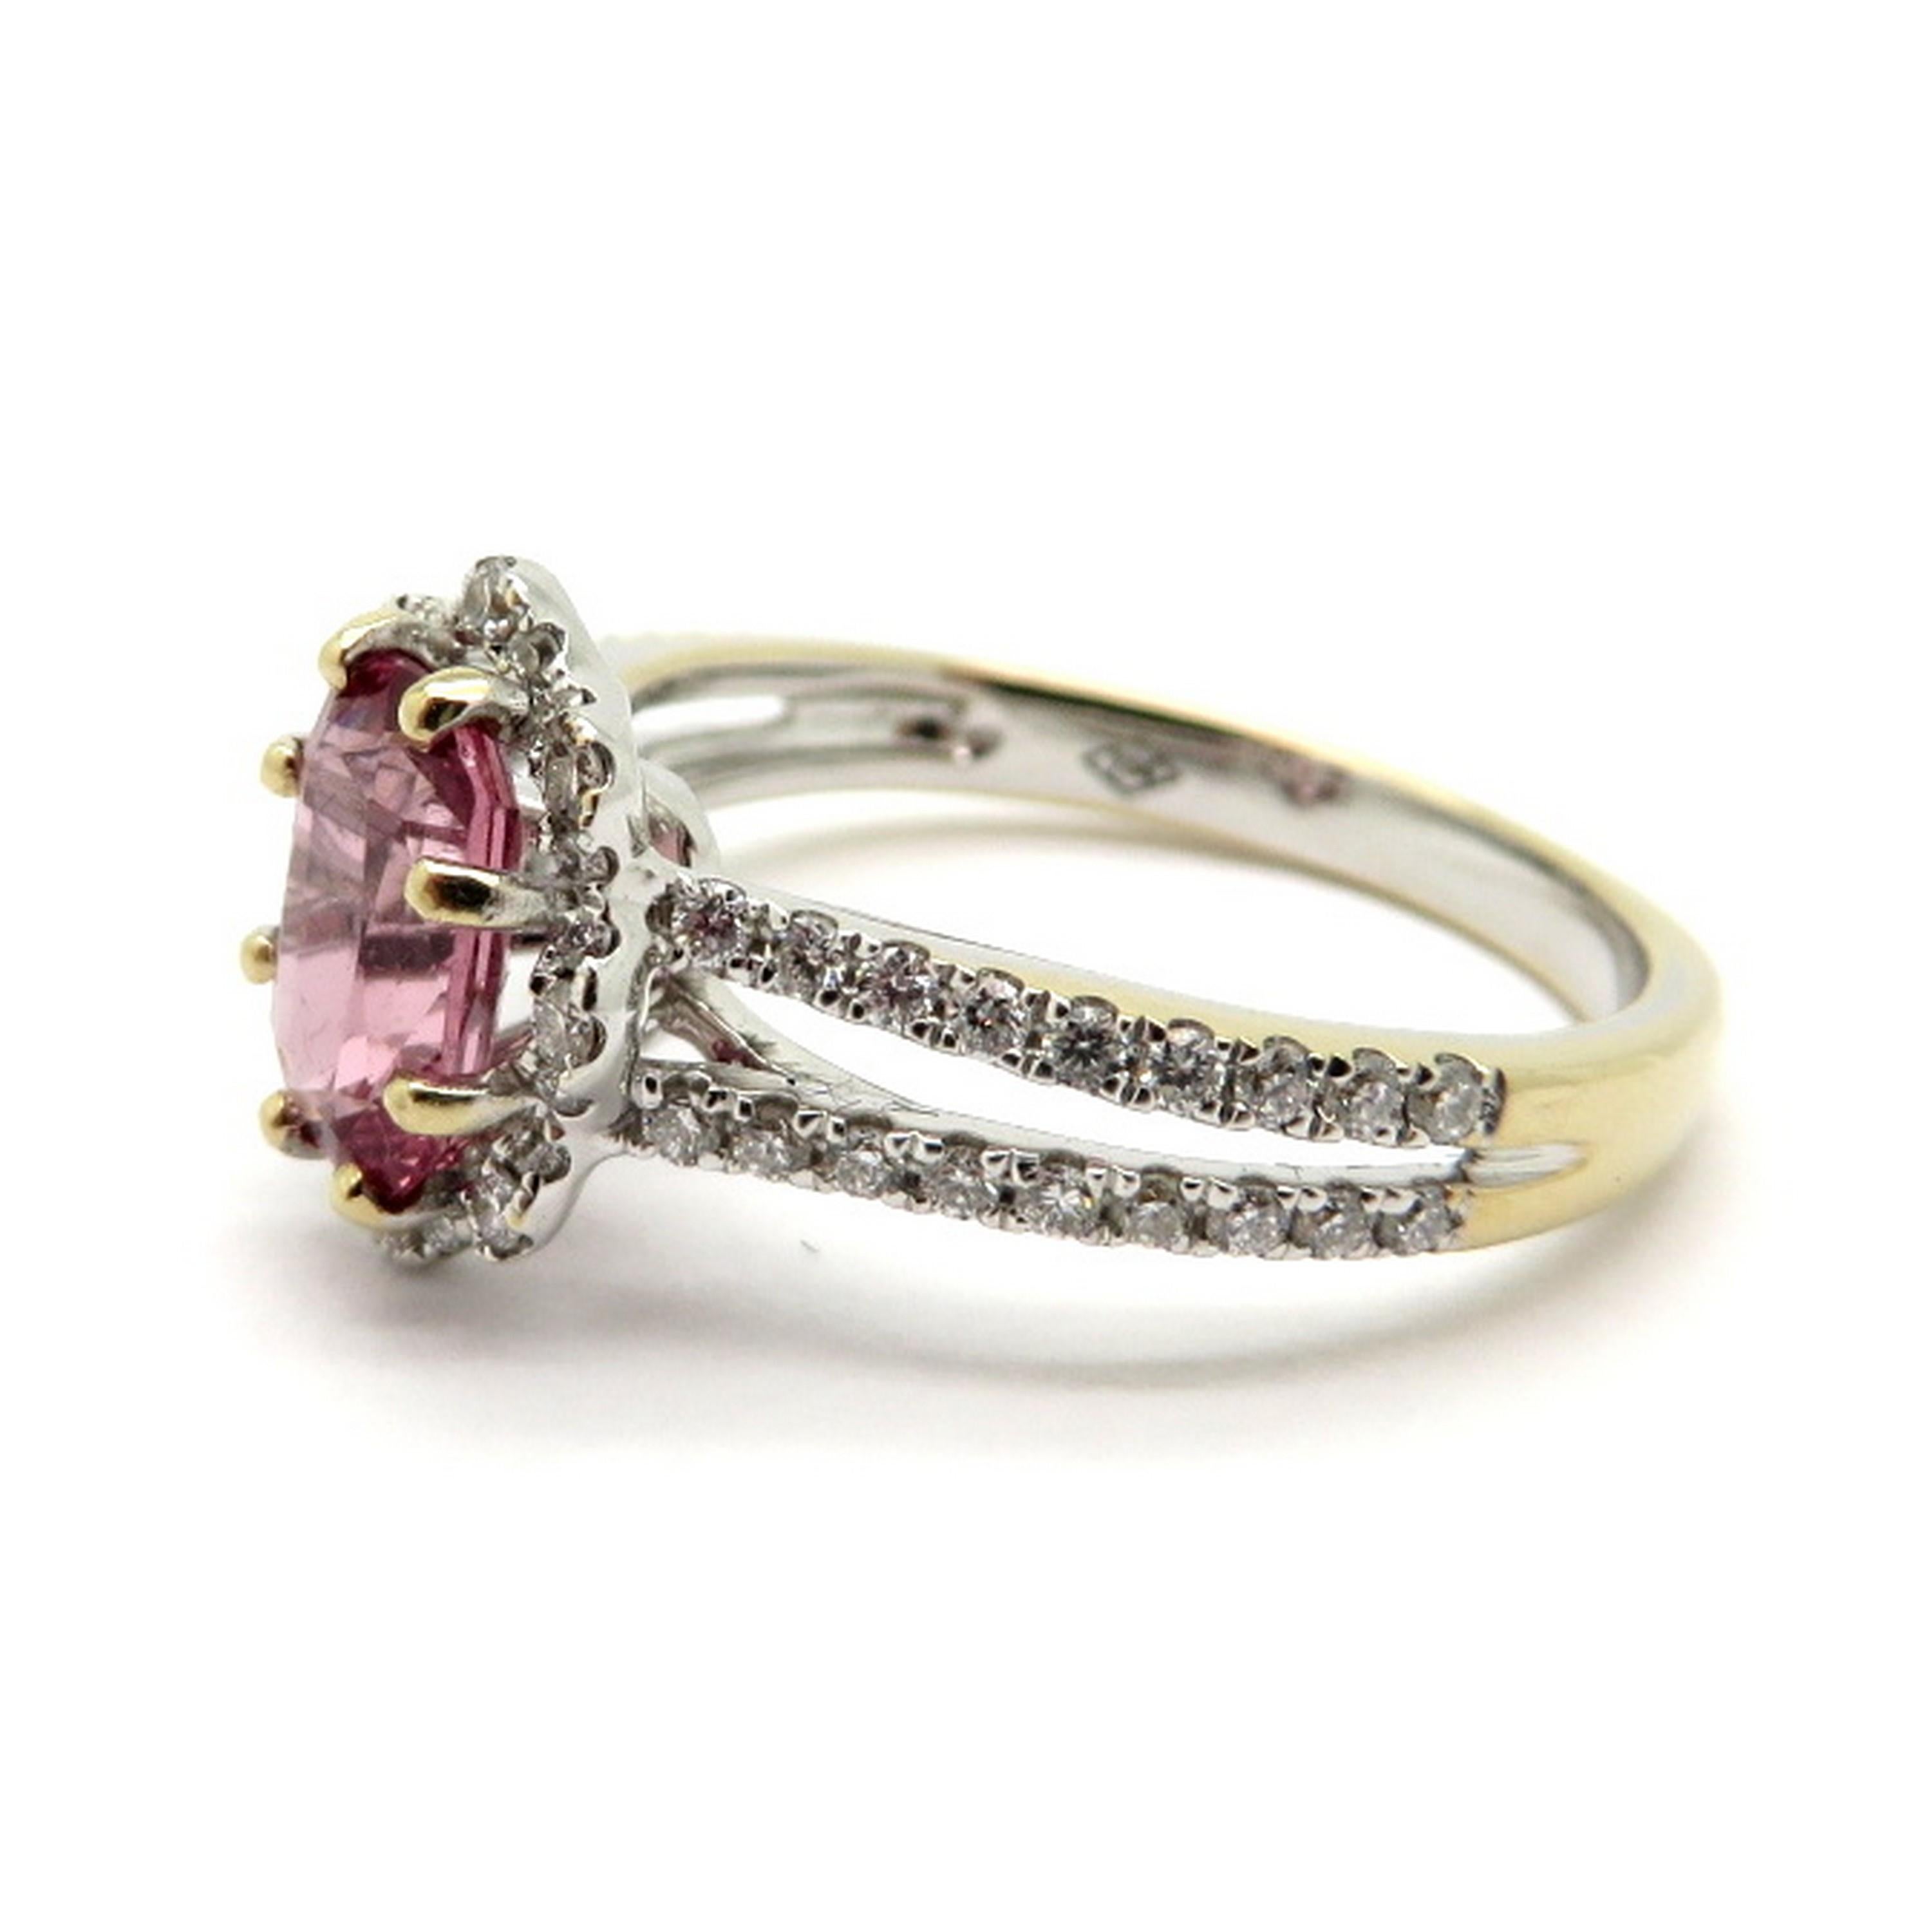 Estate 18K white gold pink spinel and diamond fashion ring. Showcasing one fine quality oval brilliant cut pink spinel, eight prong set, weighing approximately 1.12 carats. Accented with 60 round brilliant cut bead set diamonds weighing a combined